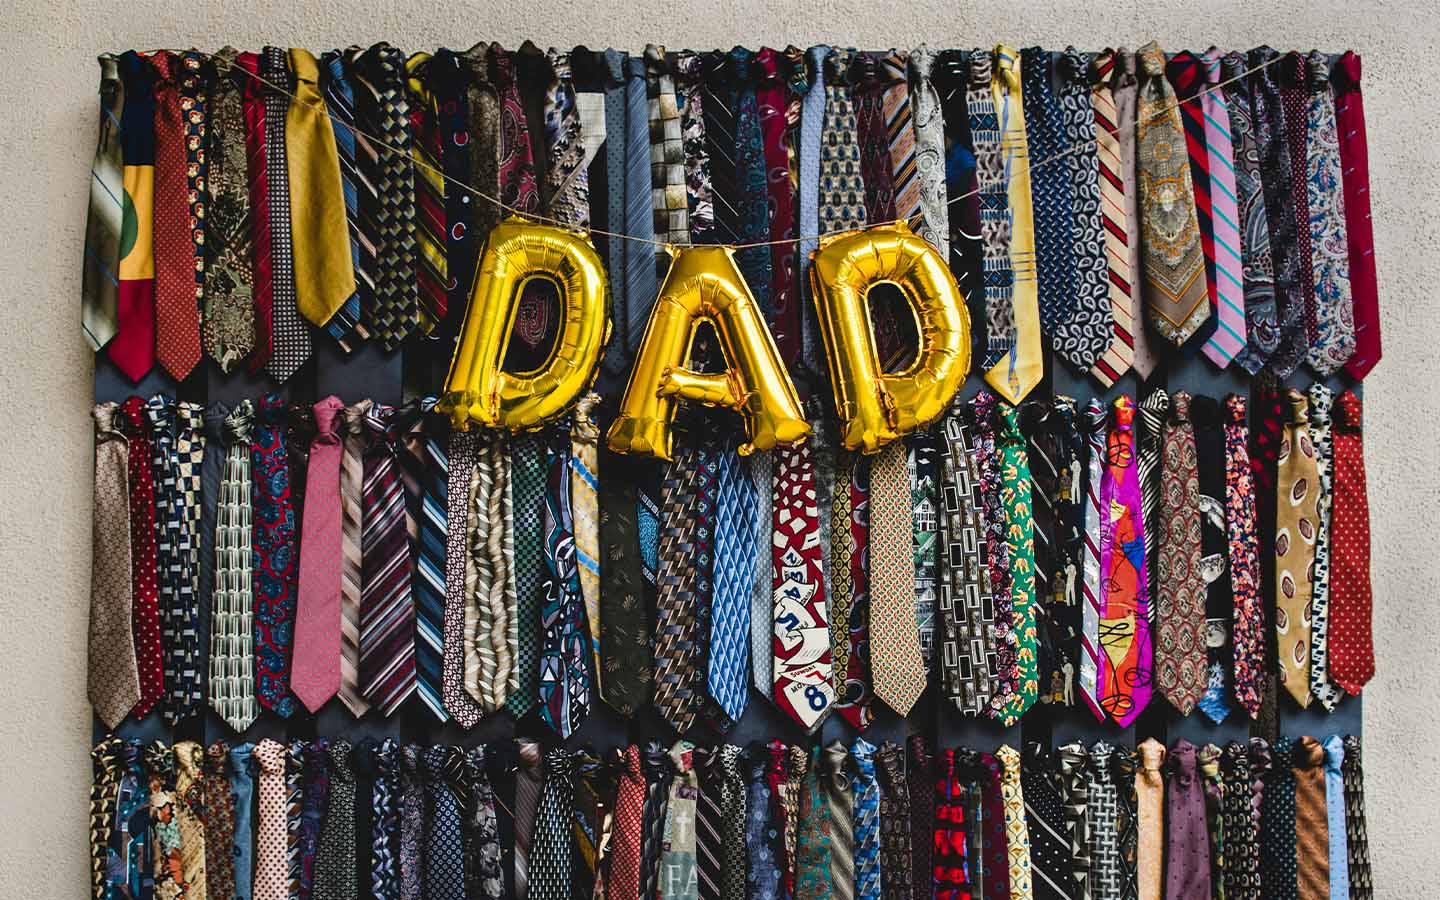 Here are some of the best dad jokes to help you celebrate Father’s Day